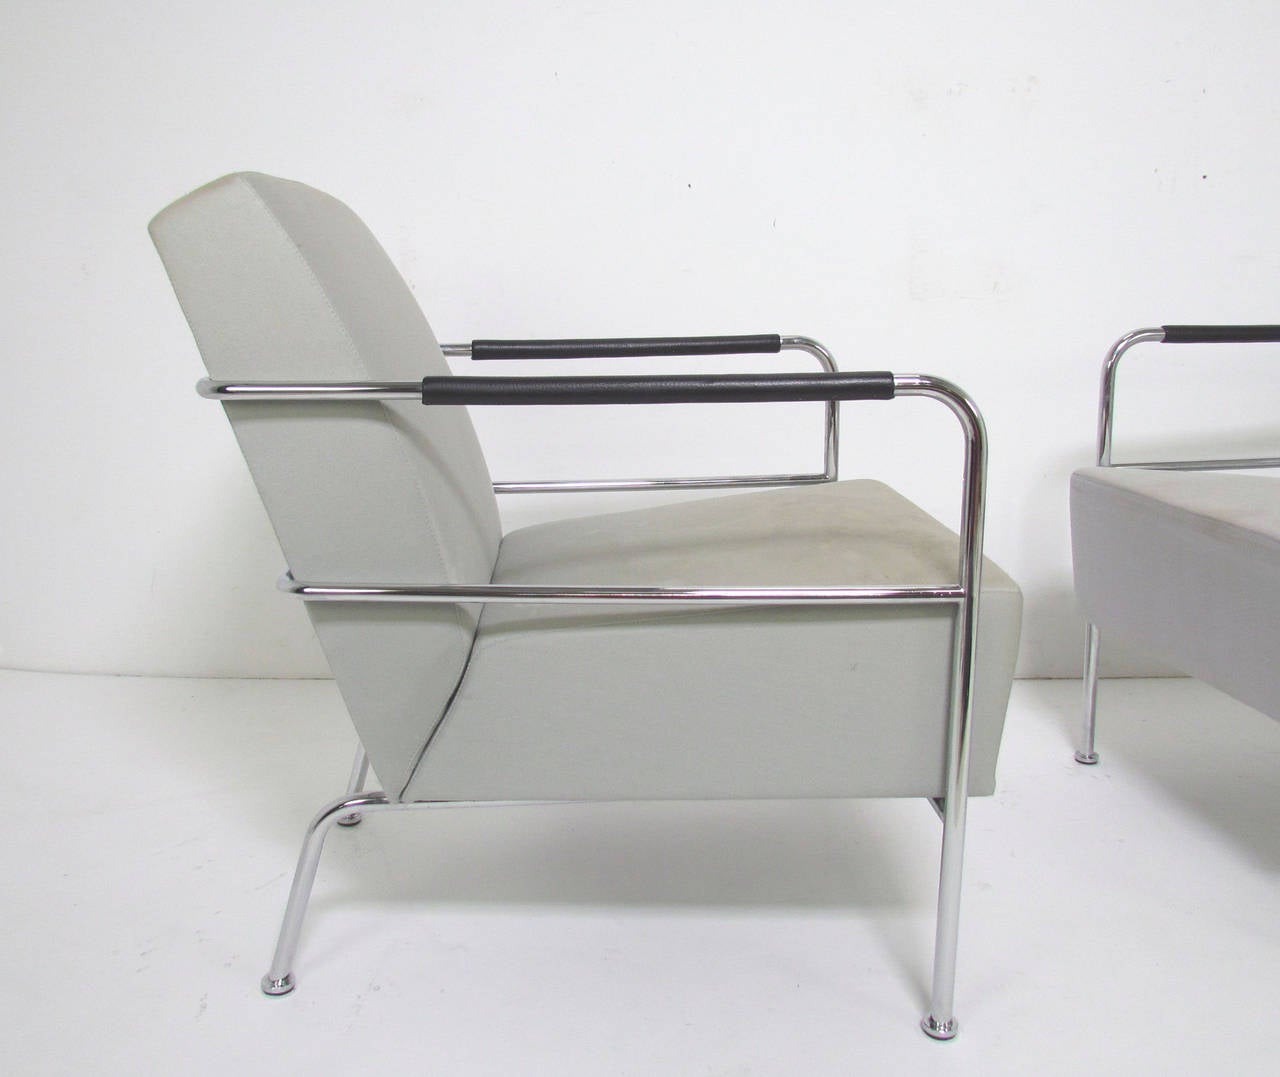 Pair of Mid-Century 1970s lounge chairs in a Bauhaus influenced style, chromed steel frames with leather wrapped armrests and flared back legs. Although unsigned, these chairs, which were used for many years in a graphic design firm, were believed